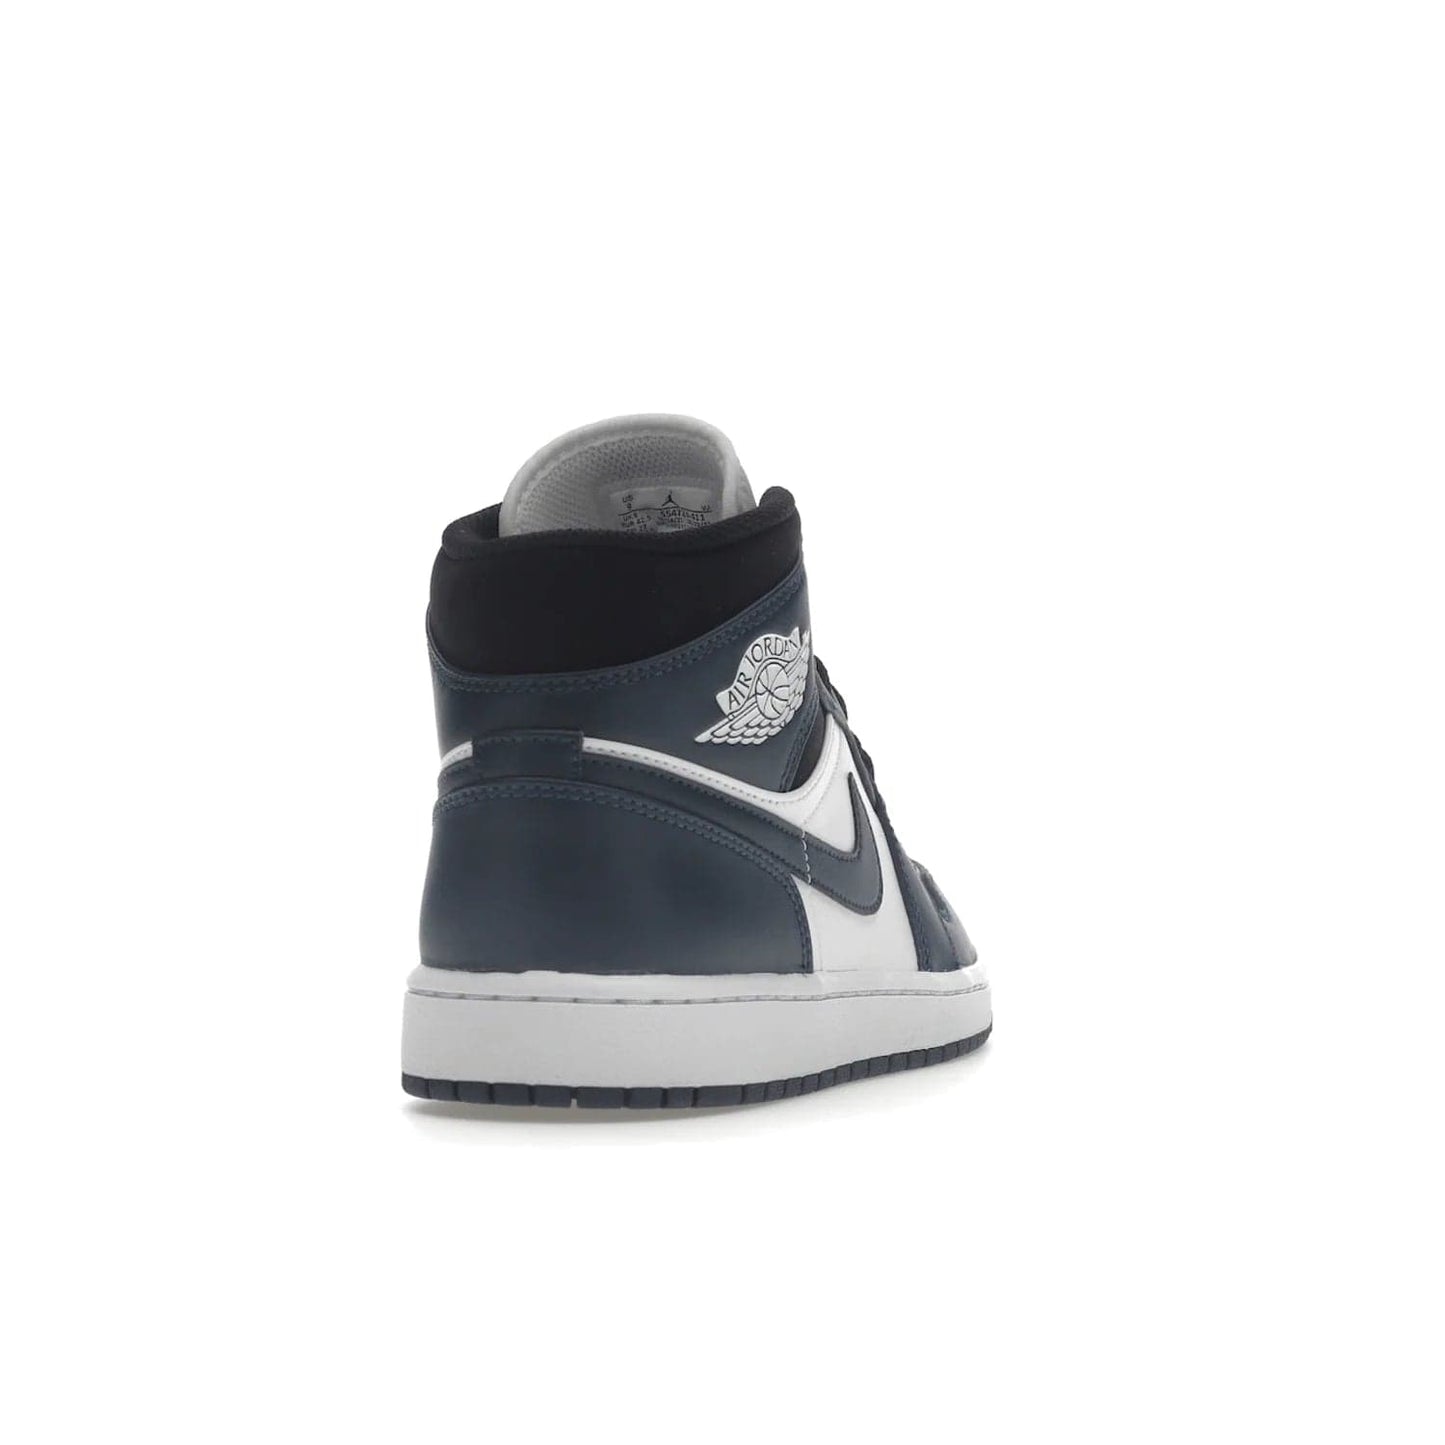 Jordan 1 Mid Armory Navy - Image 30 - Only at www.BallersClubKickz.com - The Jordan 1 Mid Armory Navy: classic basketball sneaker with soft white leather upper, deep navy blue overlays, and black leather ankle detailing. Iconic style with Jordan Wings logo and Jumpman label.